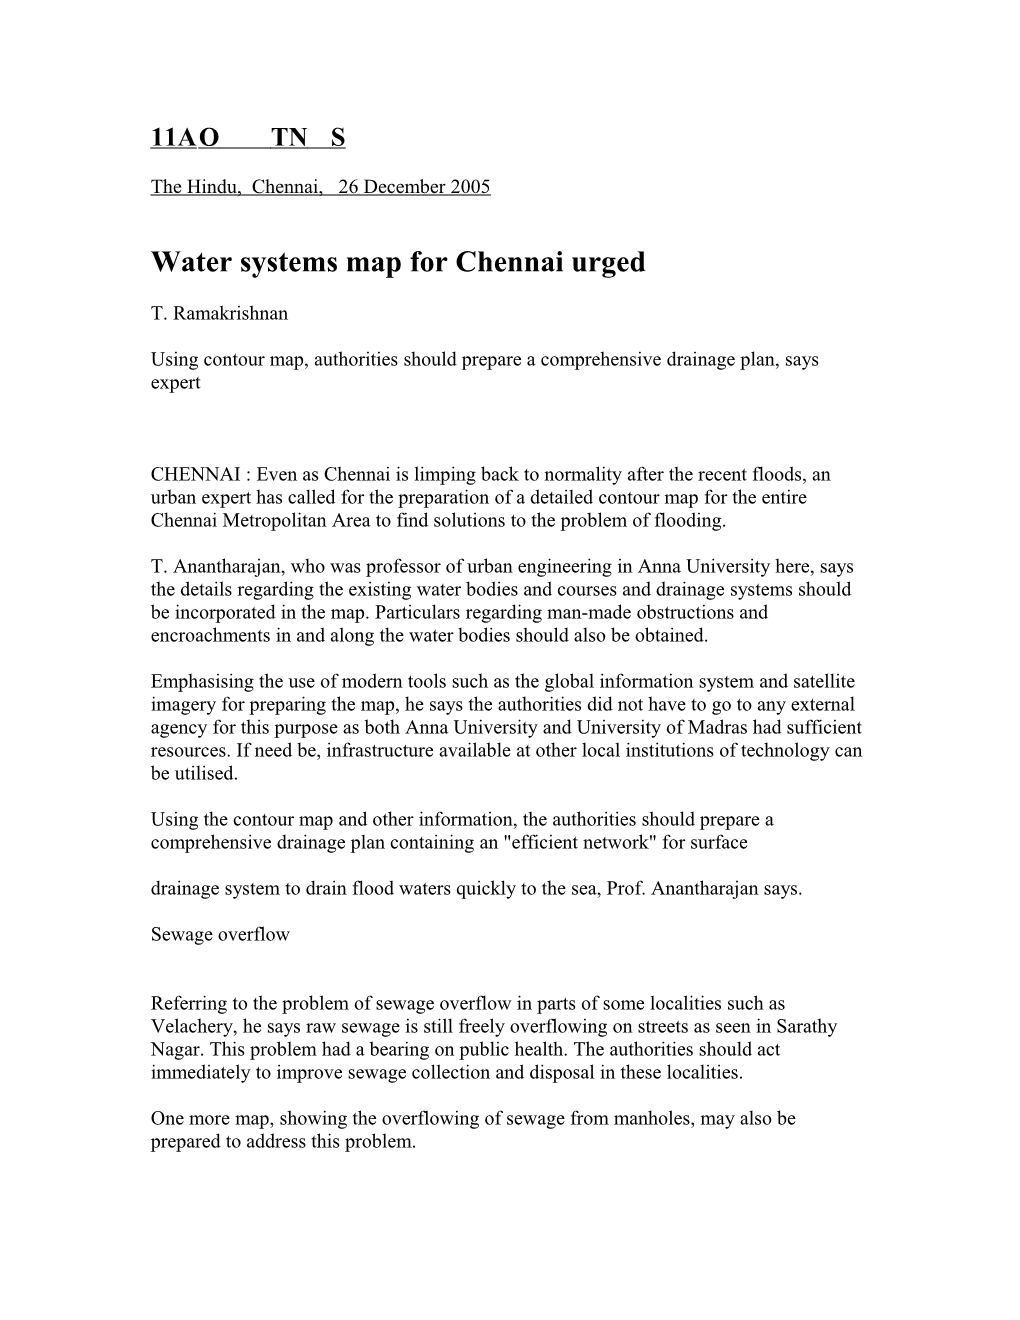 Water Systems Map for Chennai Urged